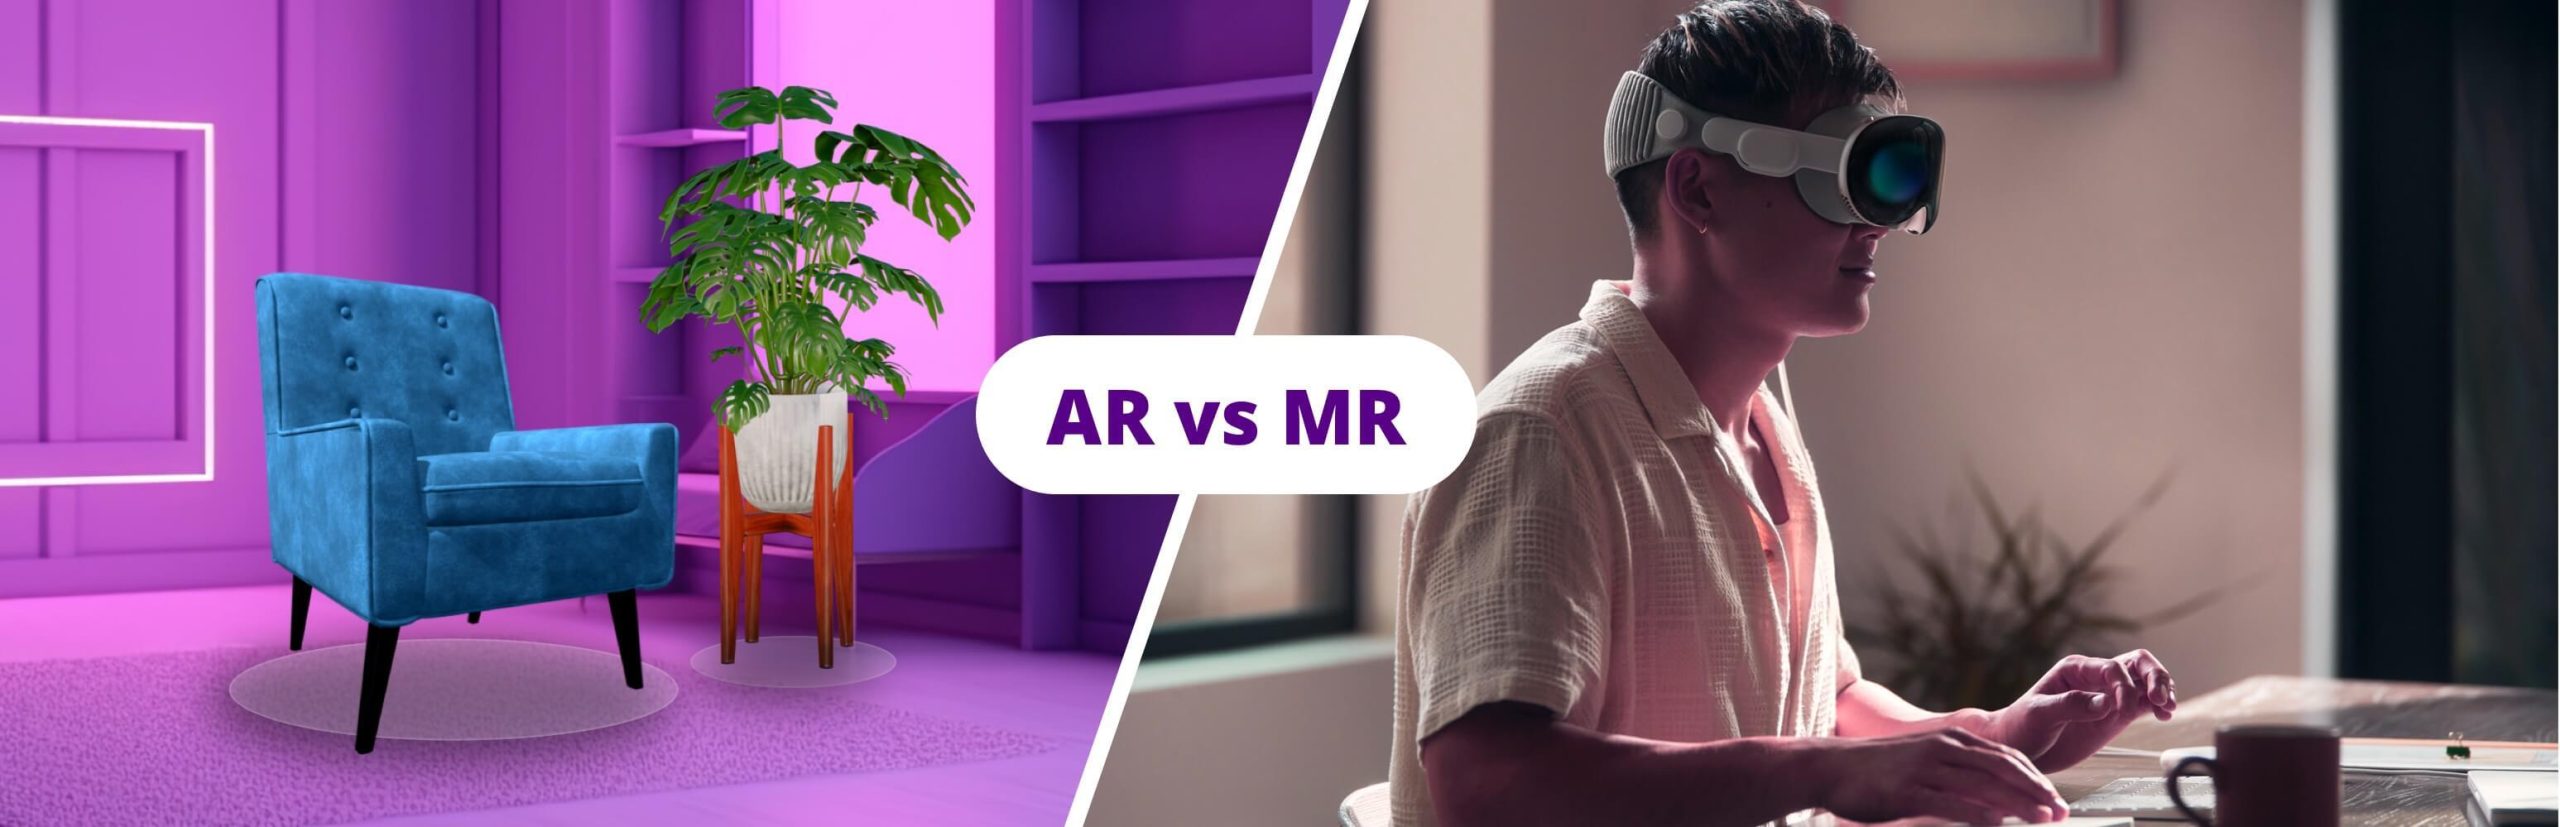 AR vs MR: Decoding the Key Differences between Augmented Reality and Mixed Reality